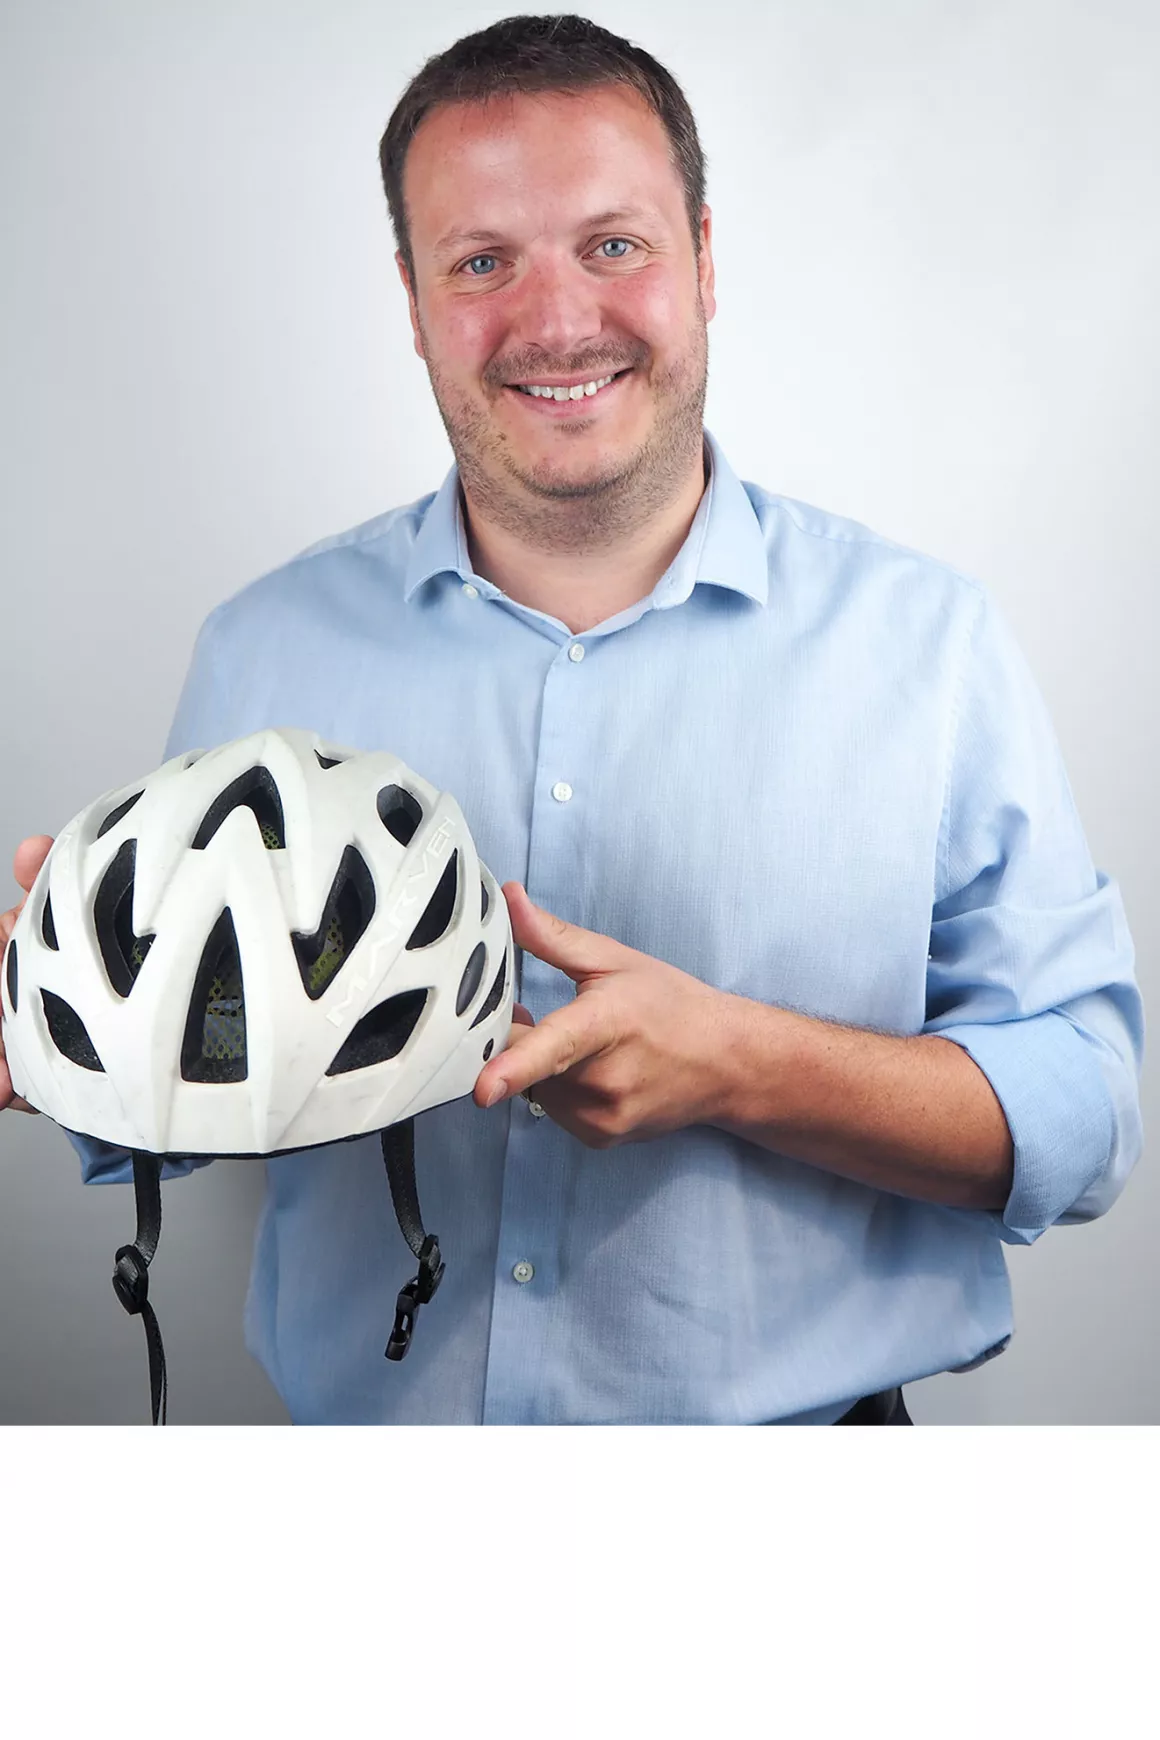 Ross Brown (Senior Consultant) wearing a blue shirt and holding a prop (white cycle helmet), photo with white background